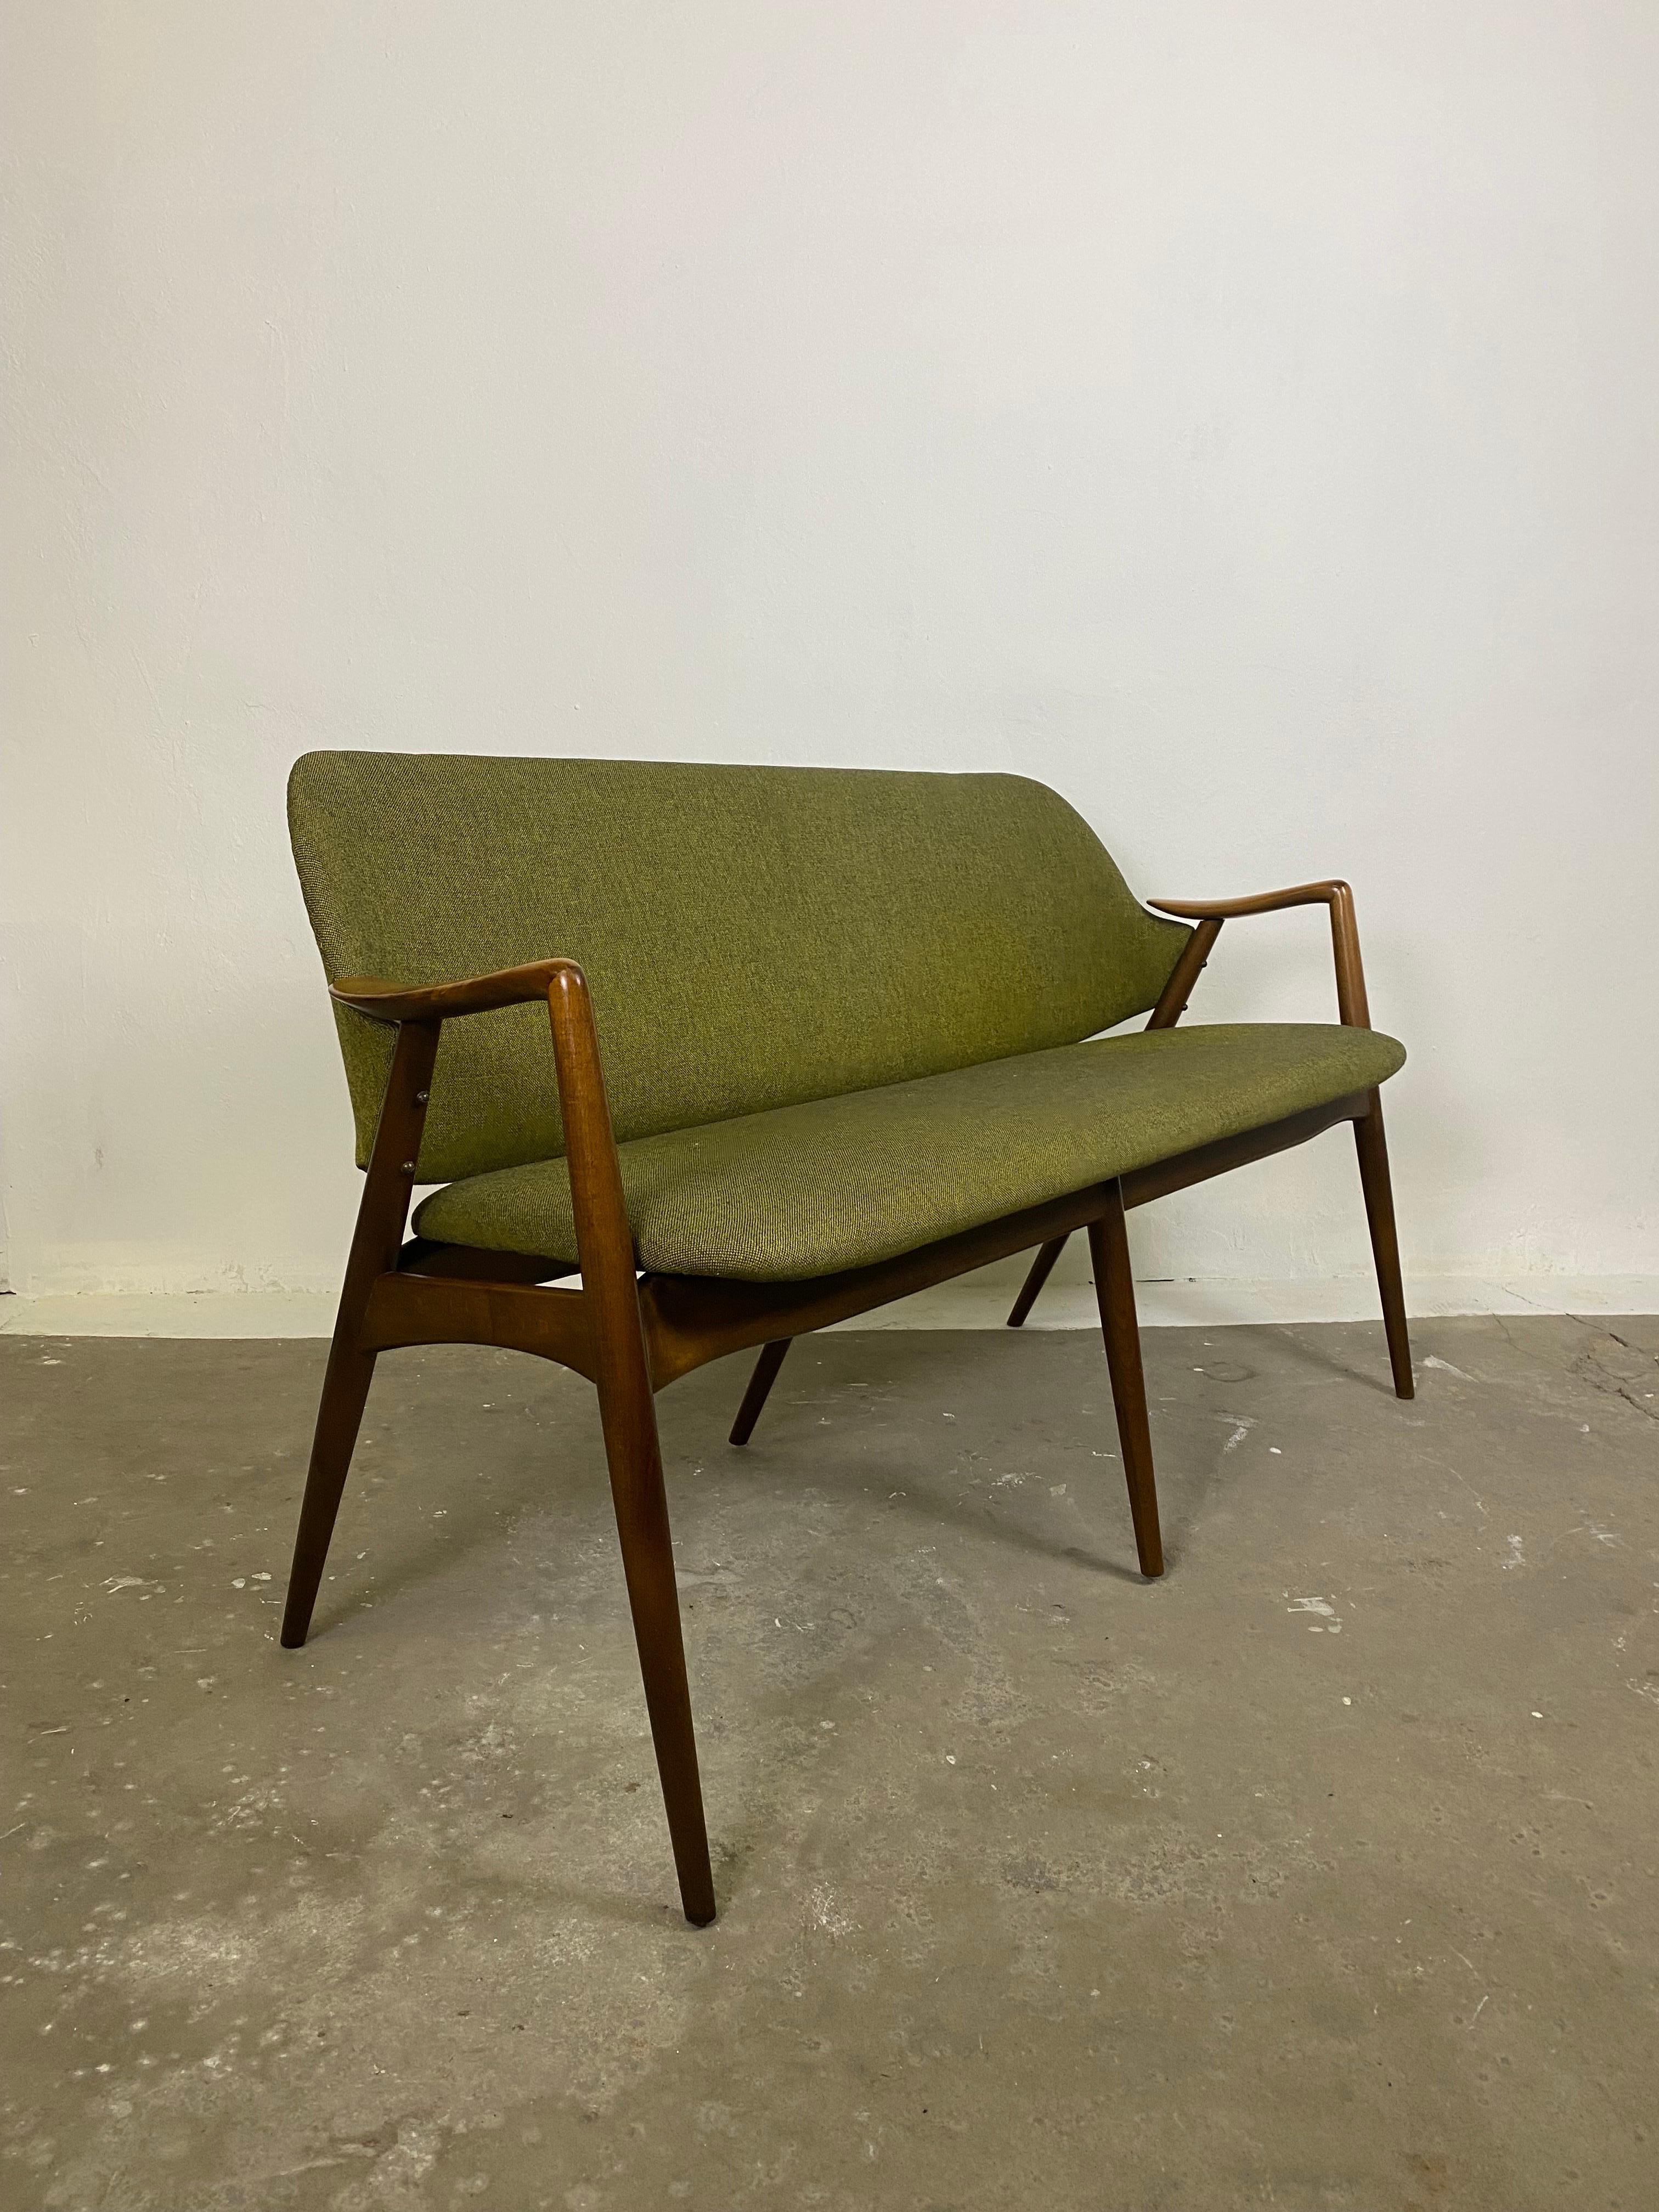 A really Ultra-Rare  Kontur Sofa or Sofa - Bench by Alf Svensson for Dux of Sweden ,1950s.
Very comfortable and ergonomic this Sofa is elegant and small enough to fit in many Room Situations.
The Upholstery is done years ago in Germany with high